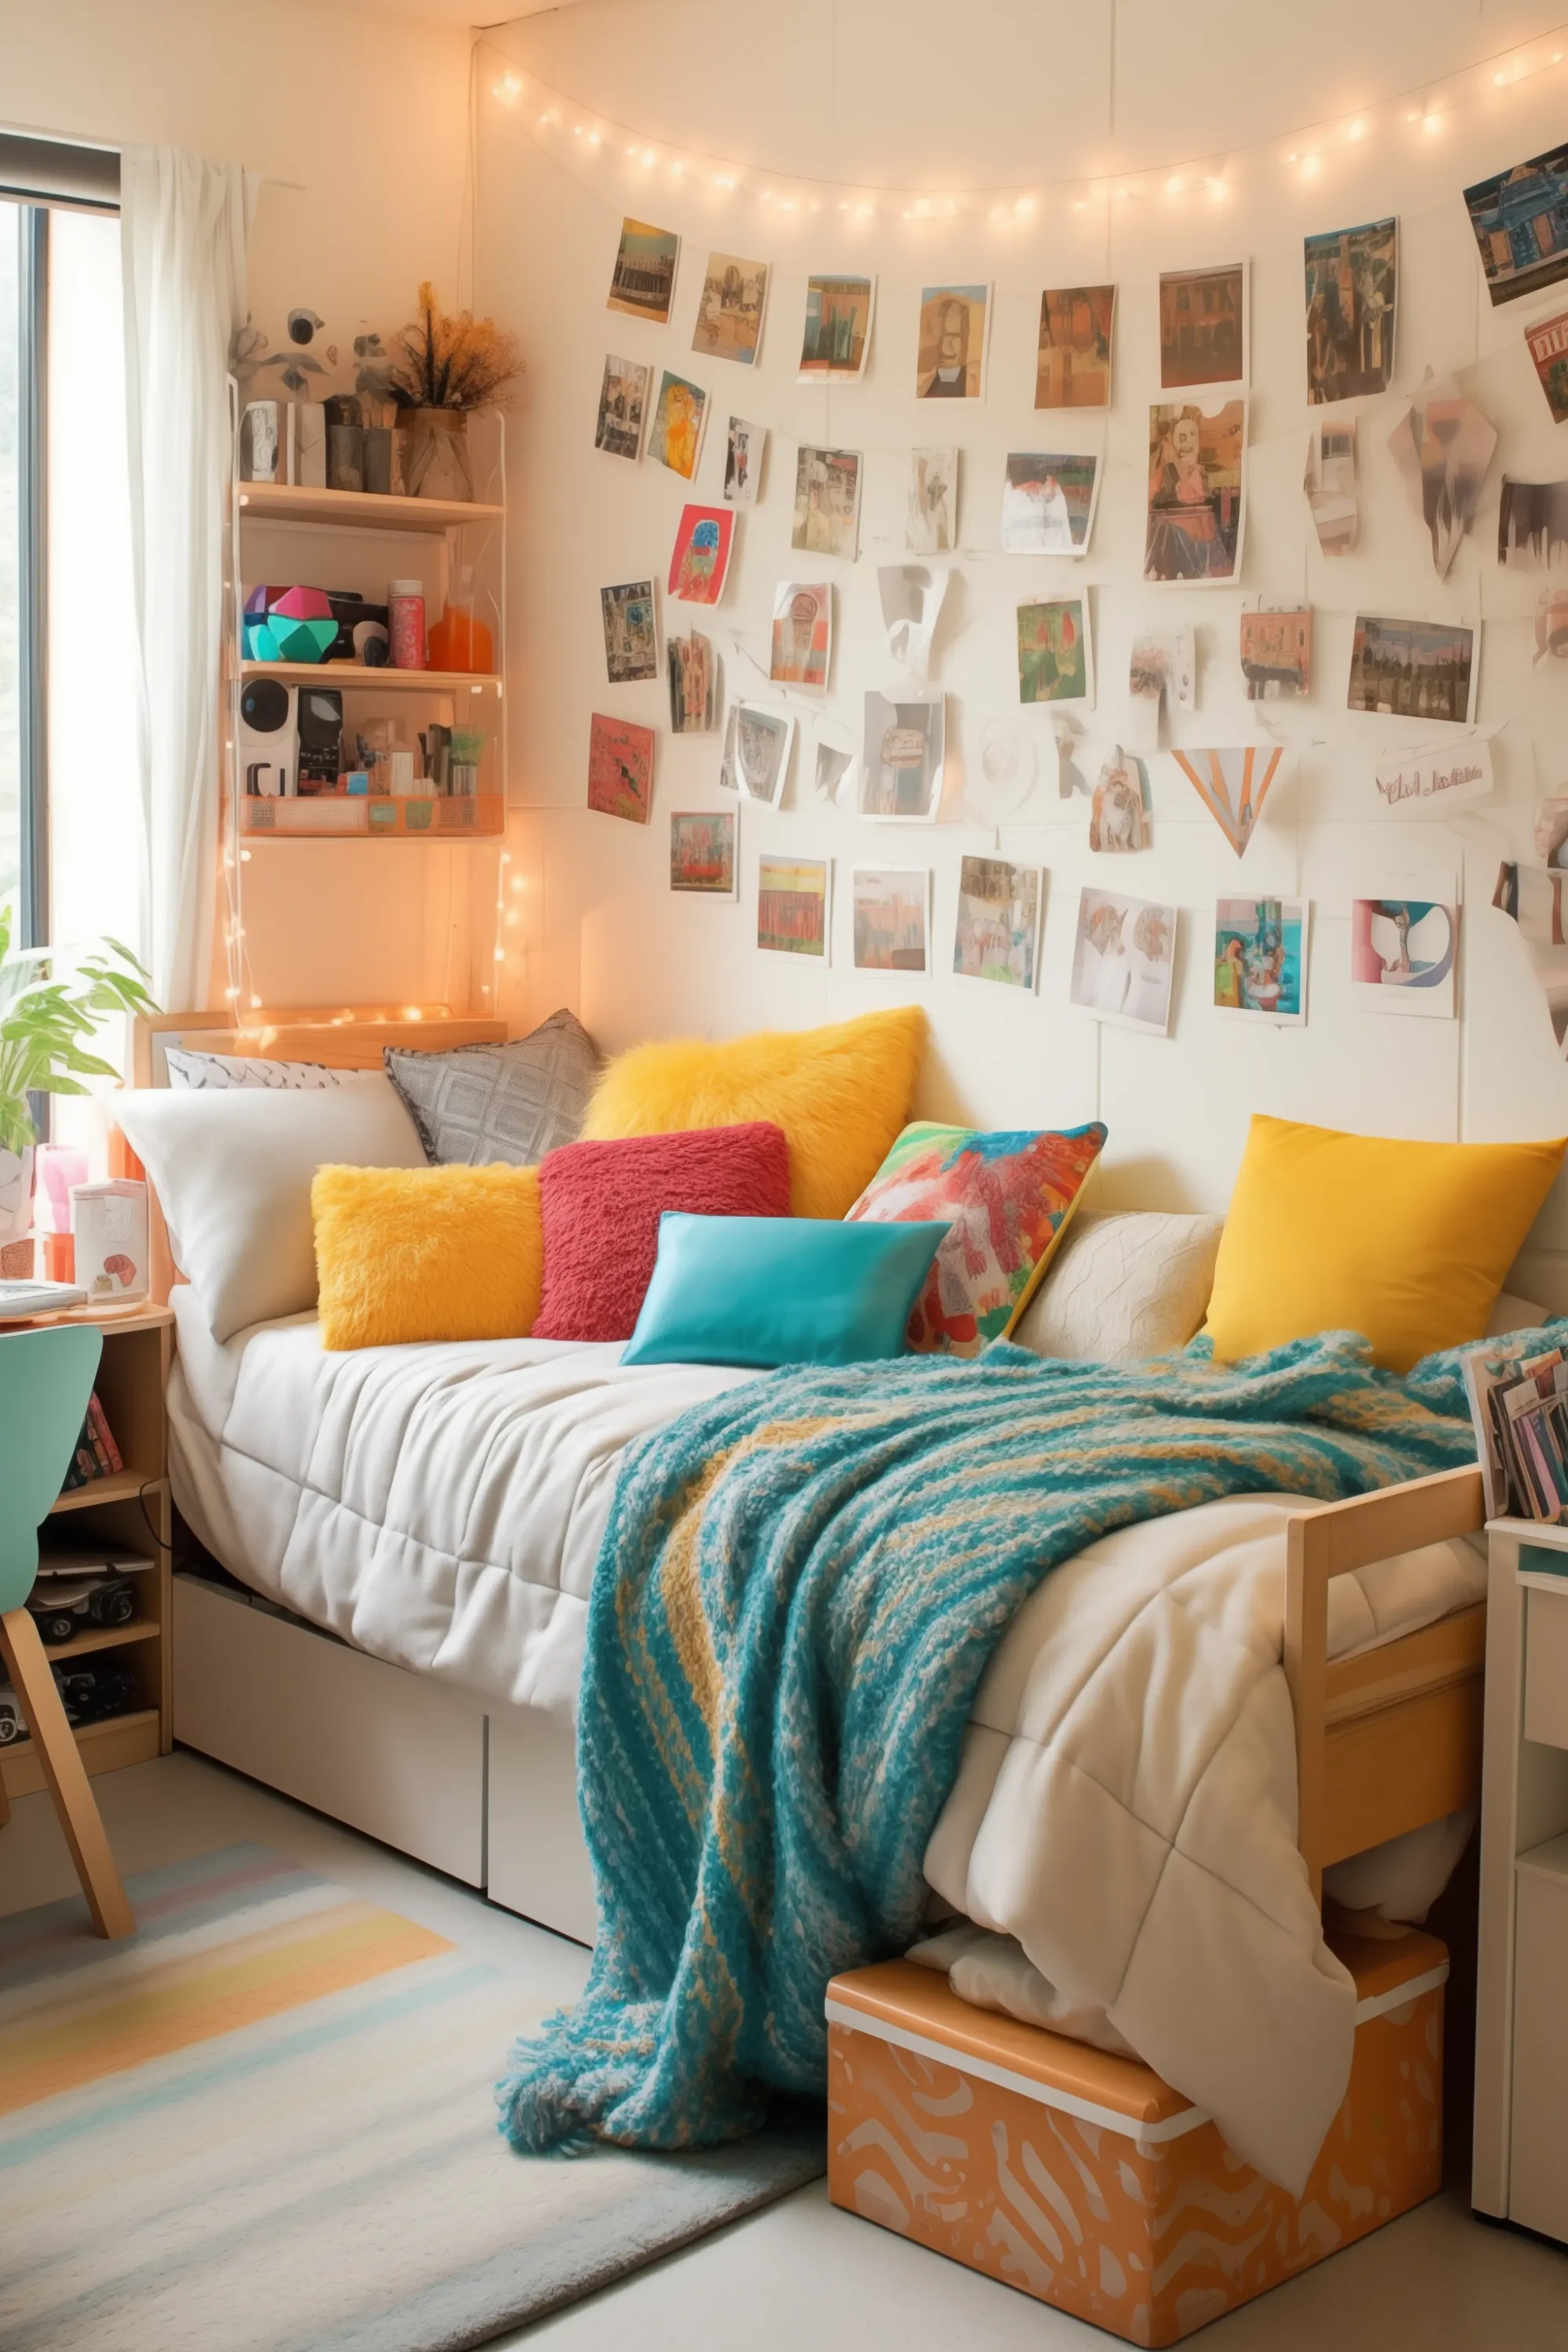 A colorful bedroom with a photo wall